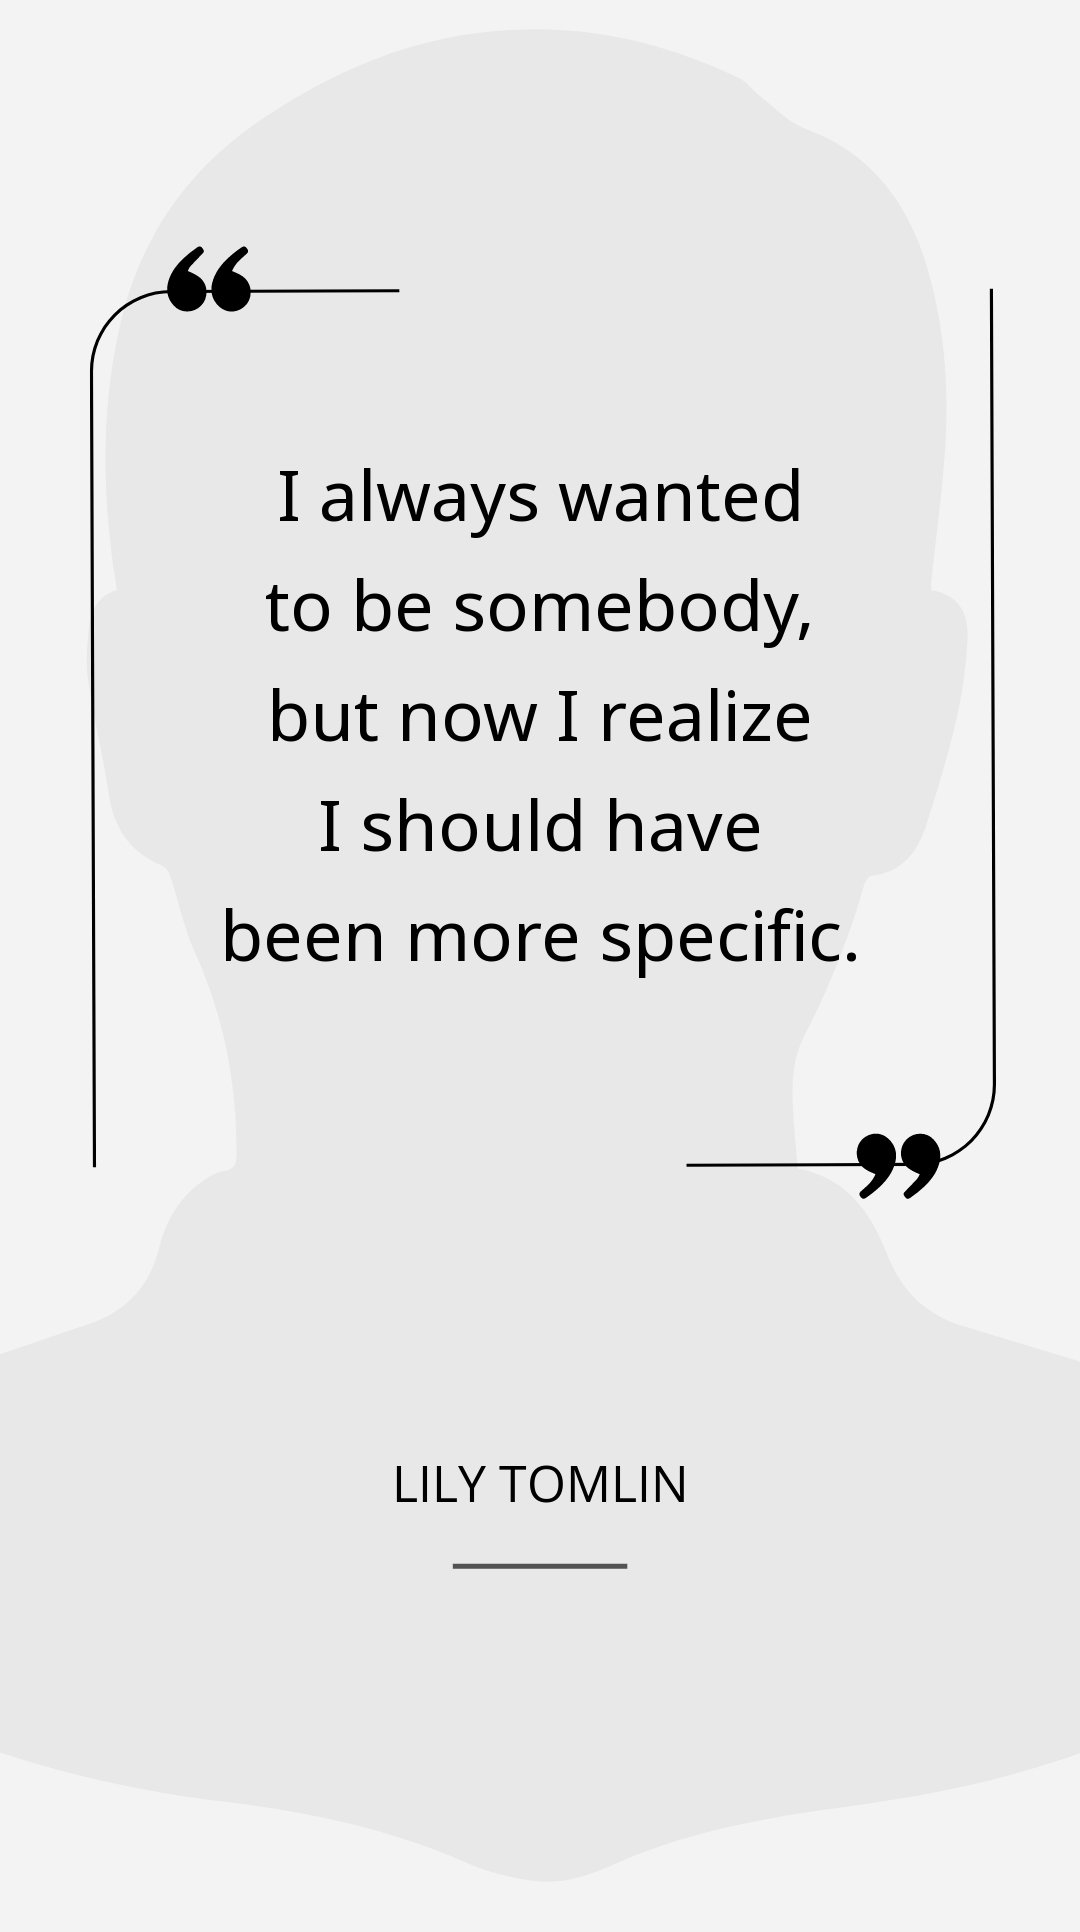 Lily Tomlin - I always wanted to be somebody, but now I realize I should have been more specific.